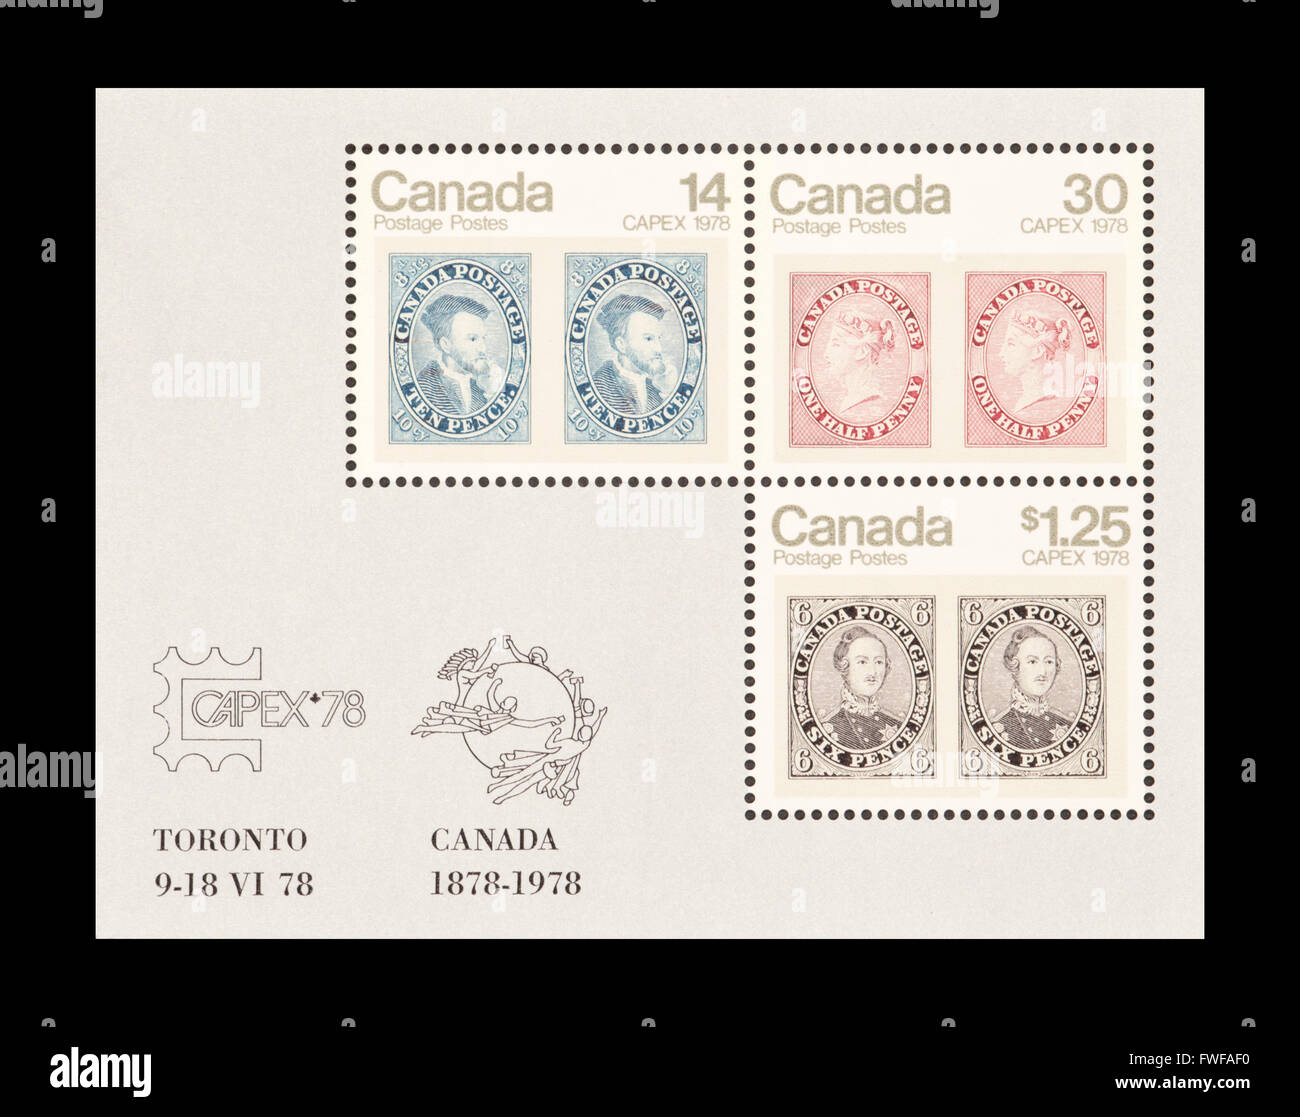 Souvenir sheet from Canada depicting early Canadian postage stamps. Stock Photo